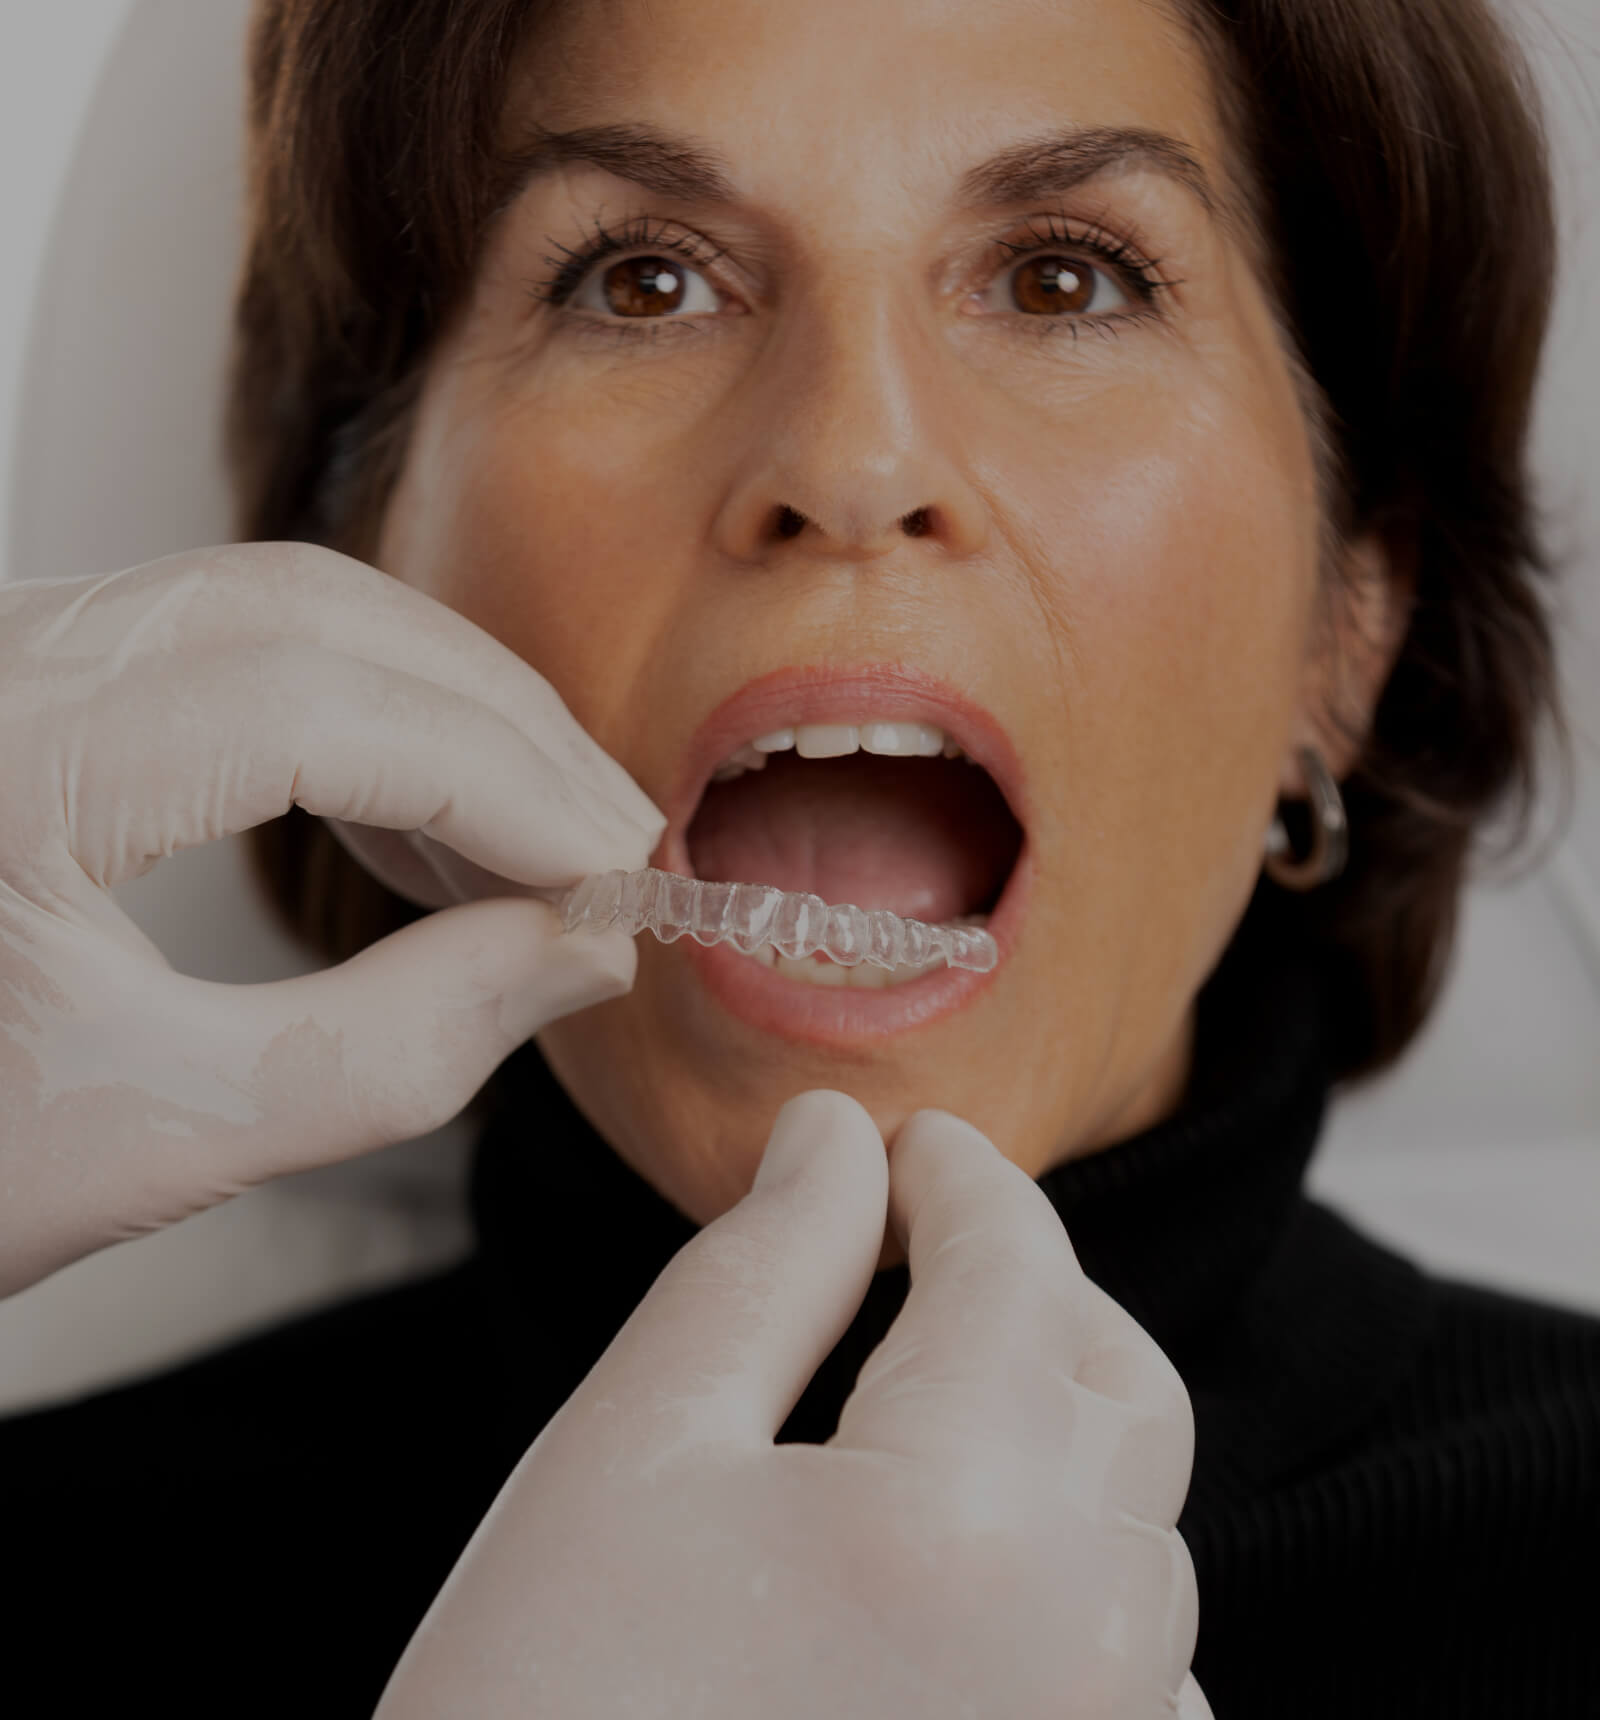 The dentist at Clinique Chloé installing an Invisalign clear aligner in a female patient's mouth